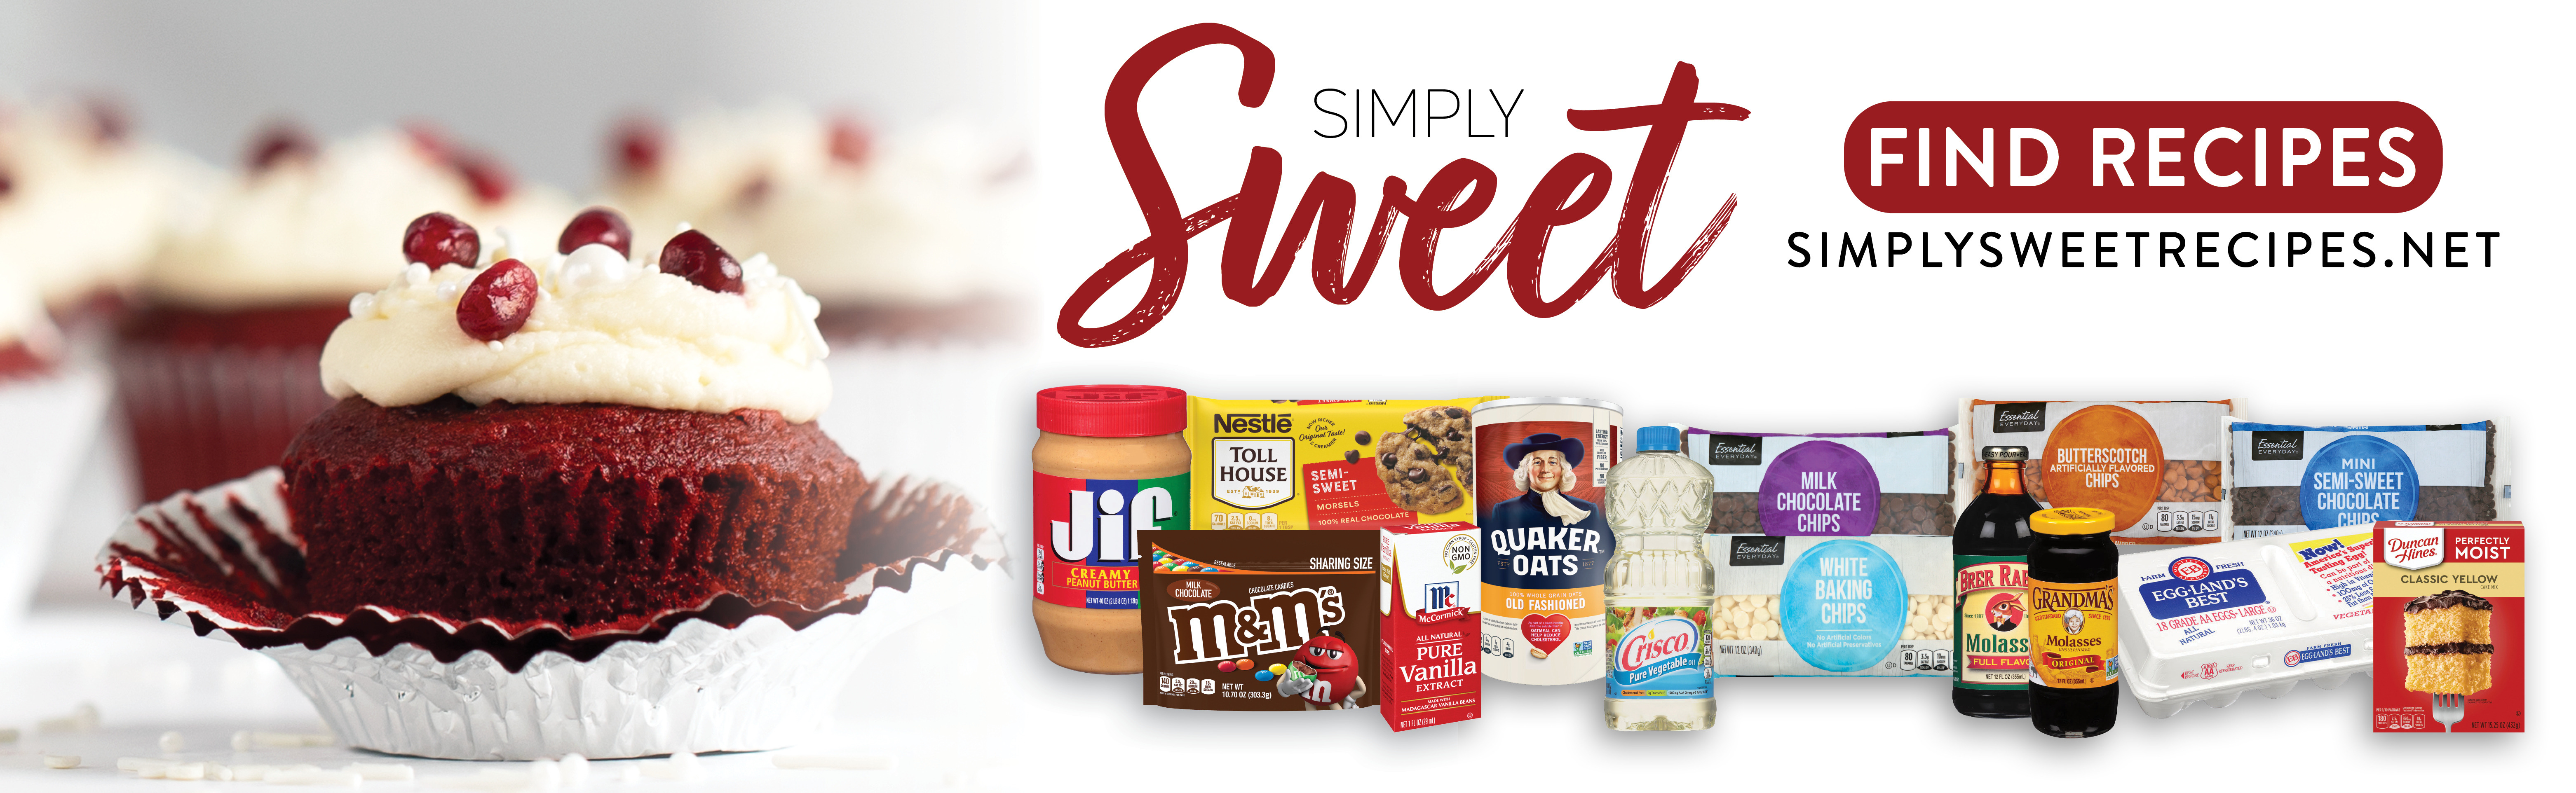 Simply Sweet - Find Recipes